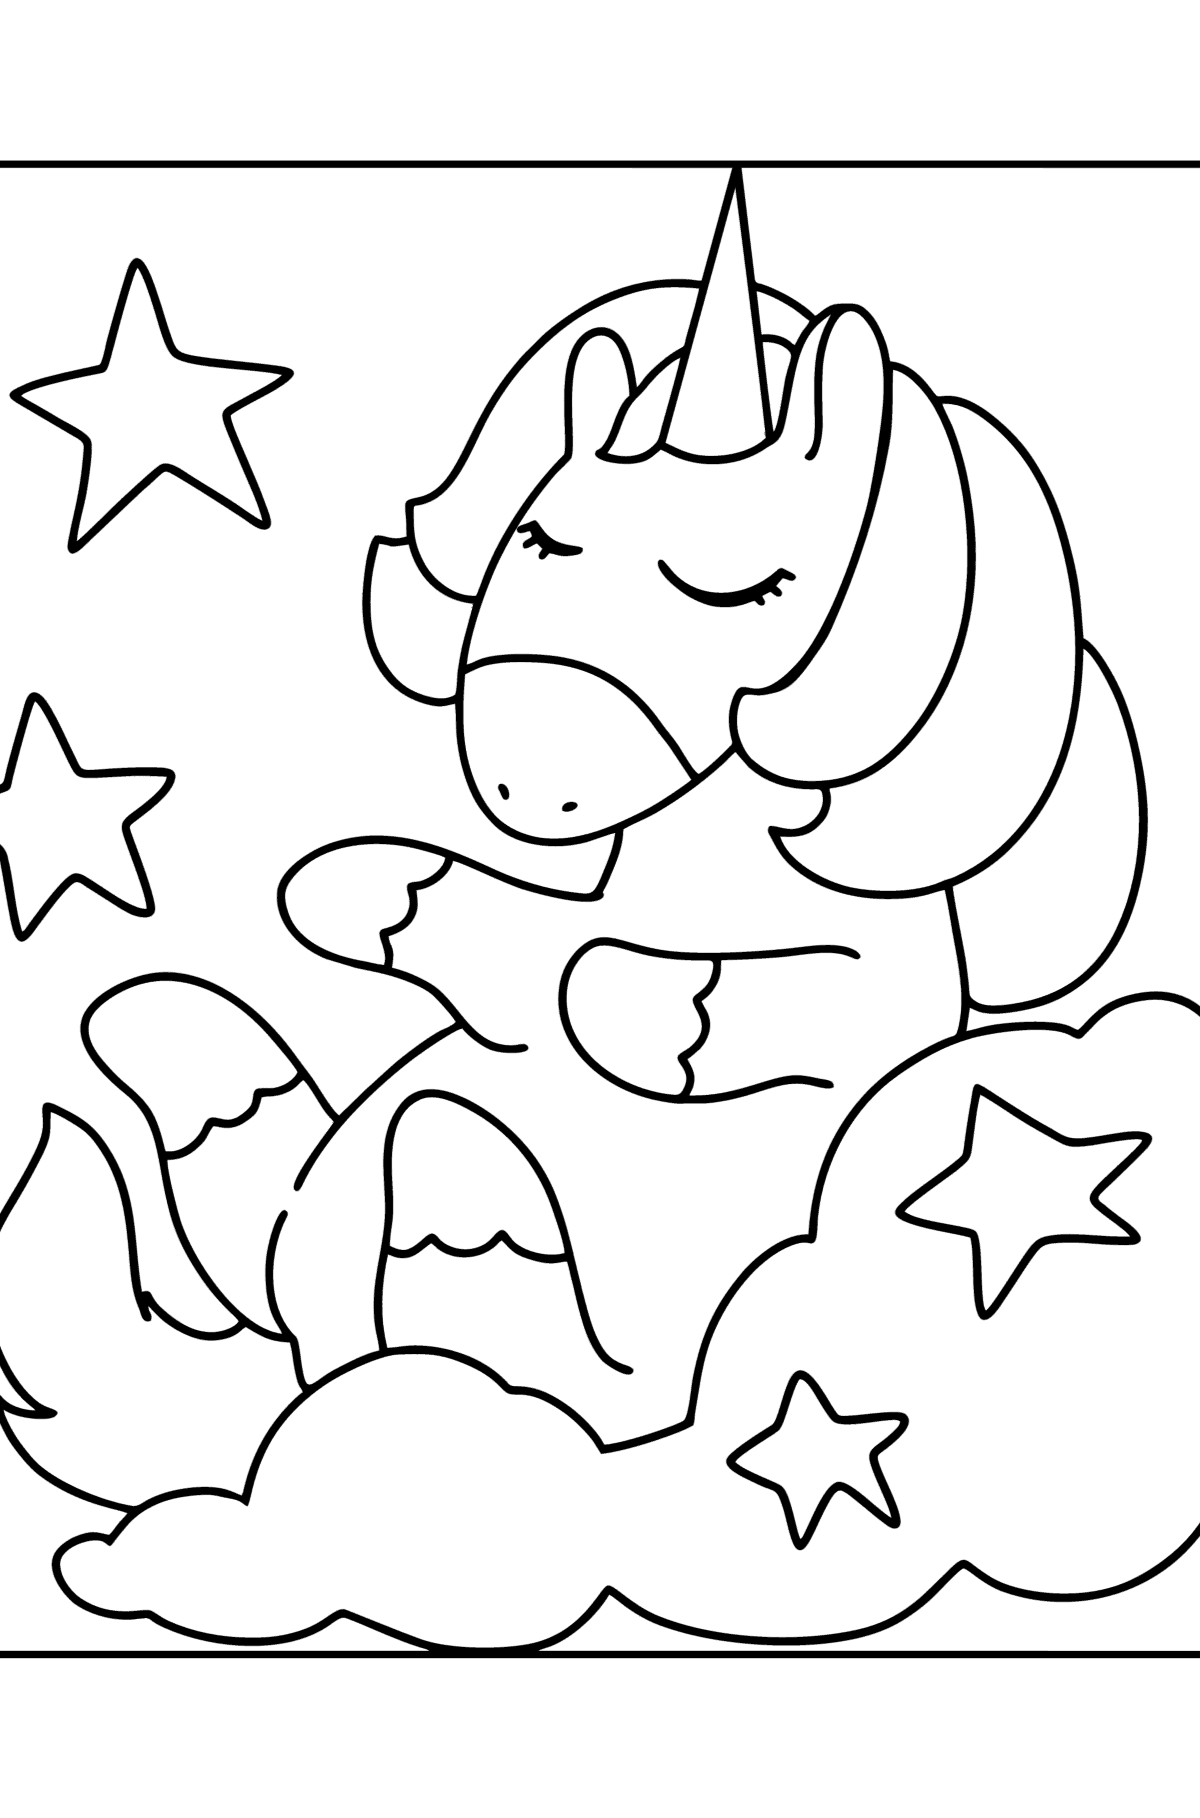 Funny unicorn coloring page - Coloring Pages for Kids